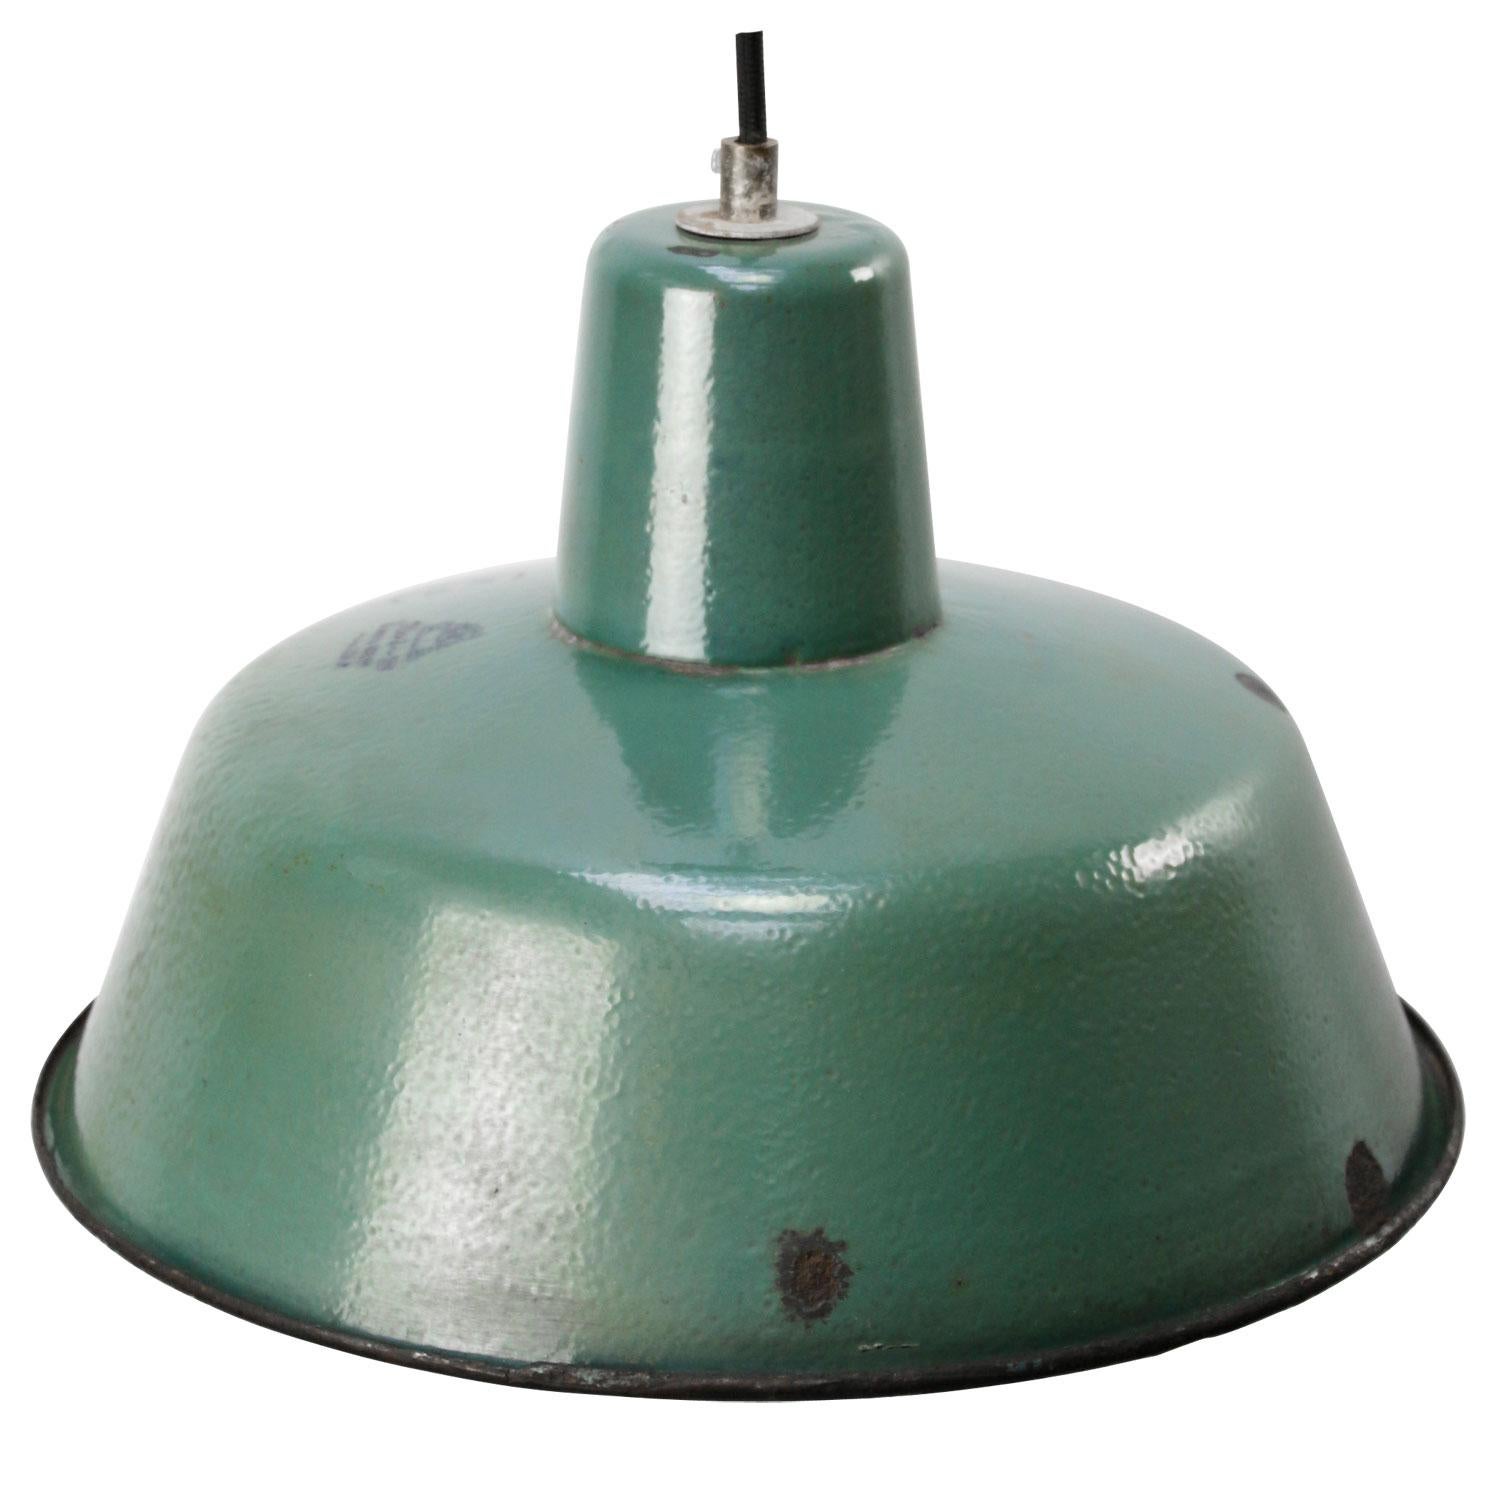 Vintage Industrial pendant.
Petrol enamel with white interior.

Weight: 1.3 kg / 2.9 lb.

Priced per individual item. All lamps have been made suitable by international standards for incandescent light bulbs, energy-efficient and LED bulbs.